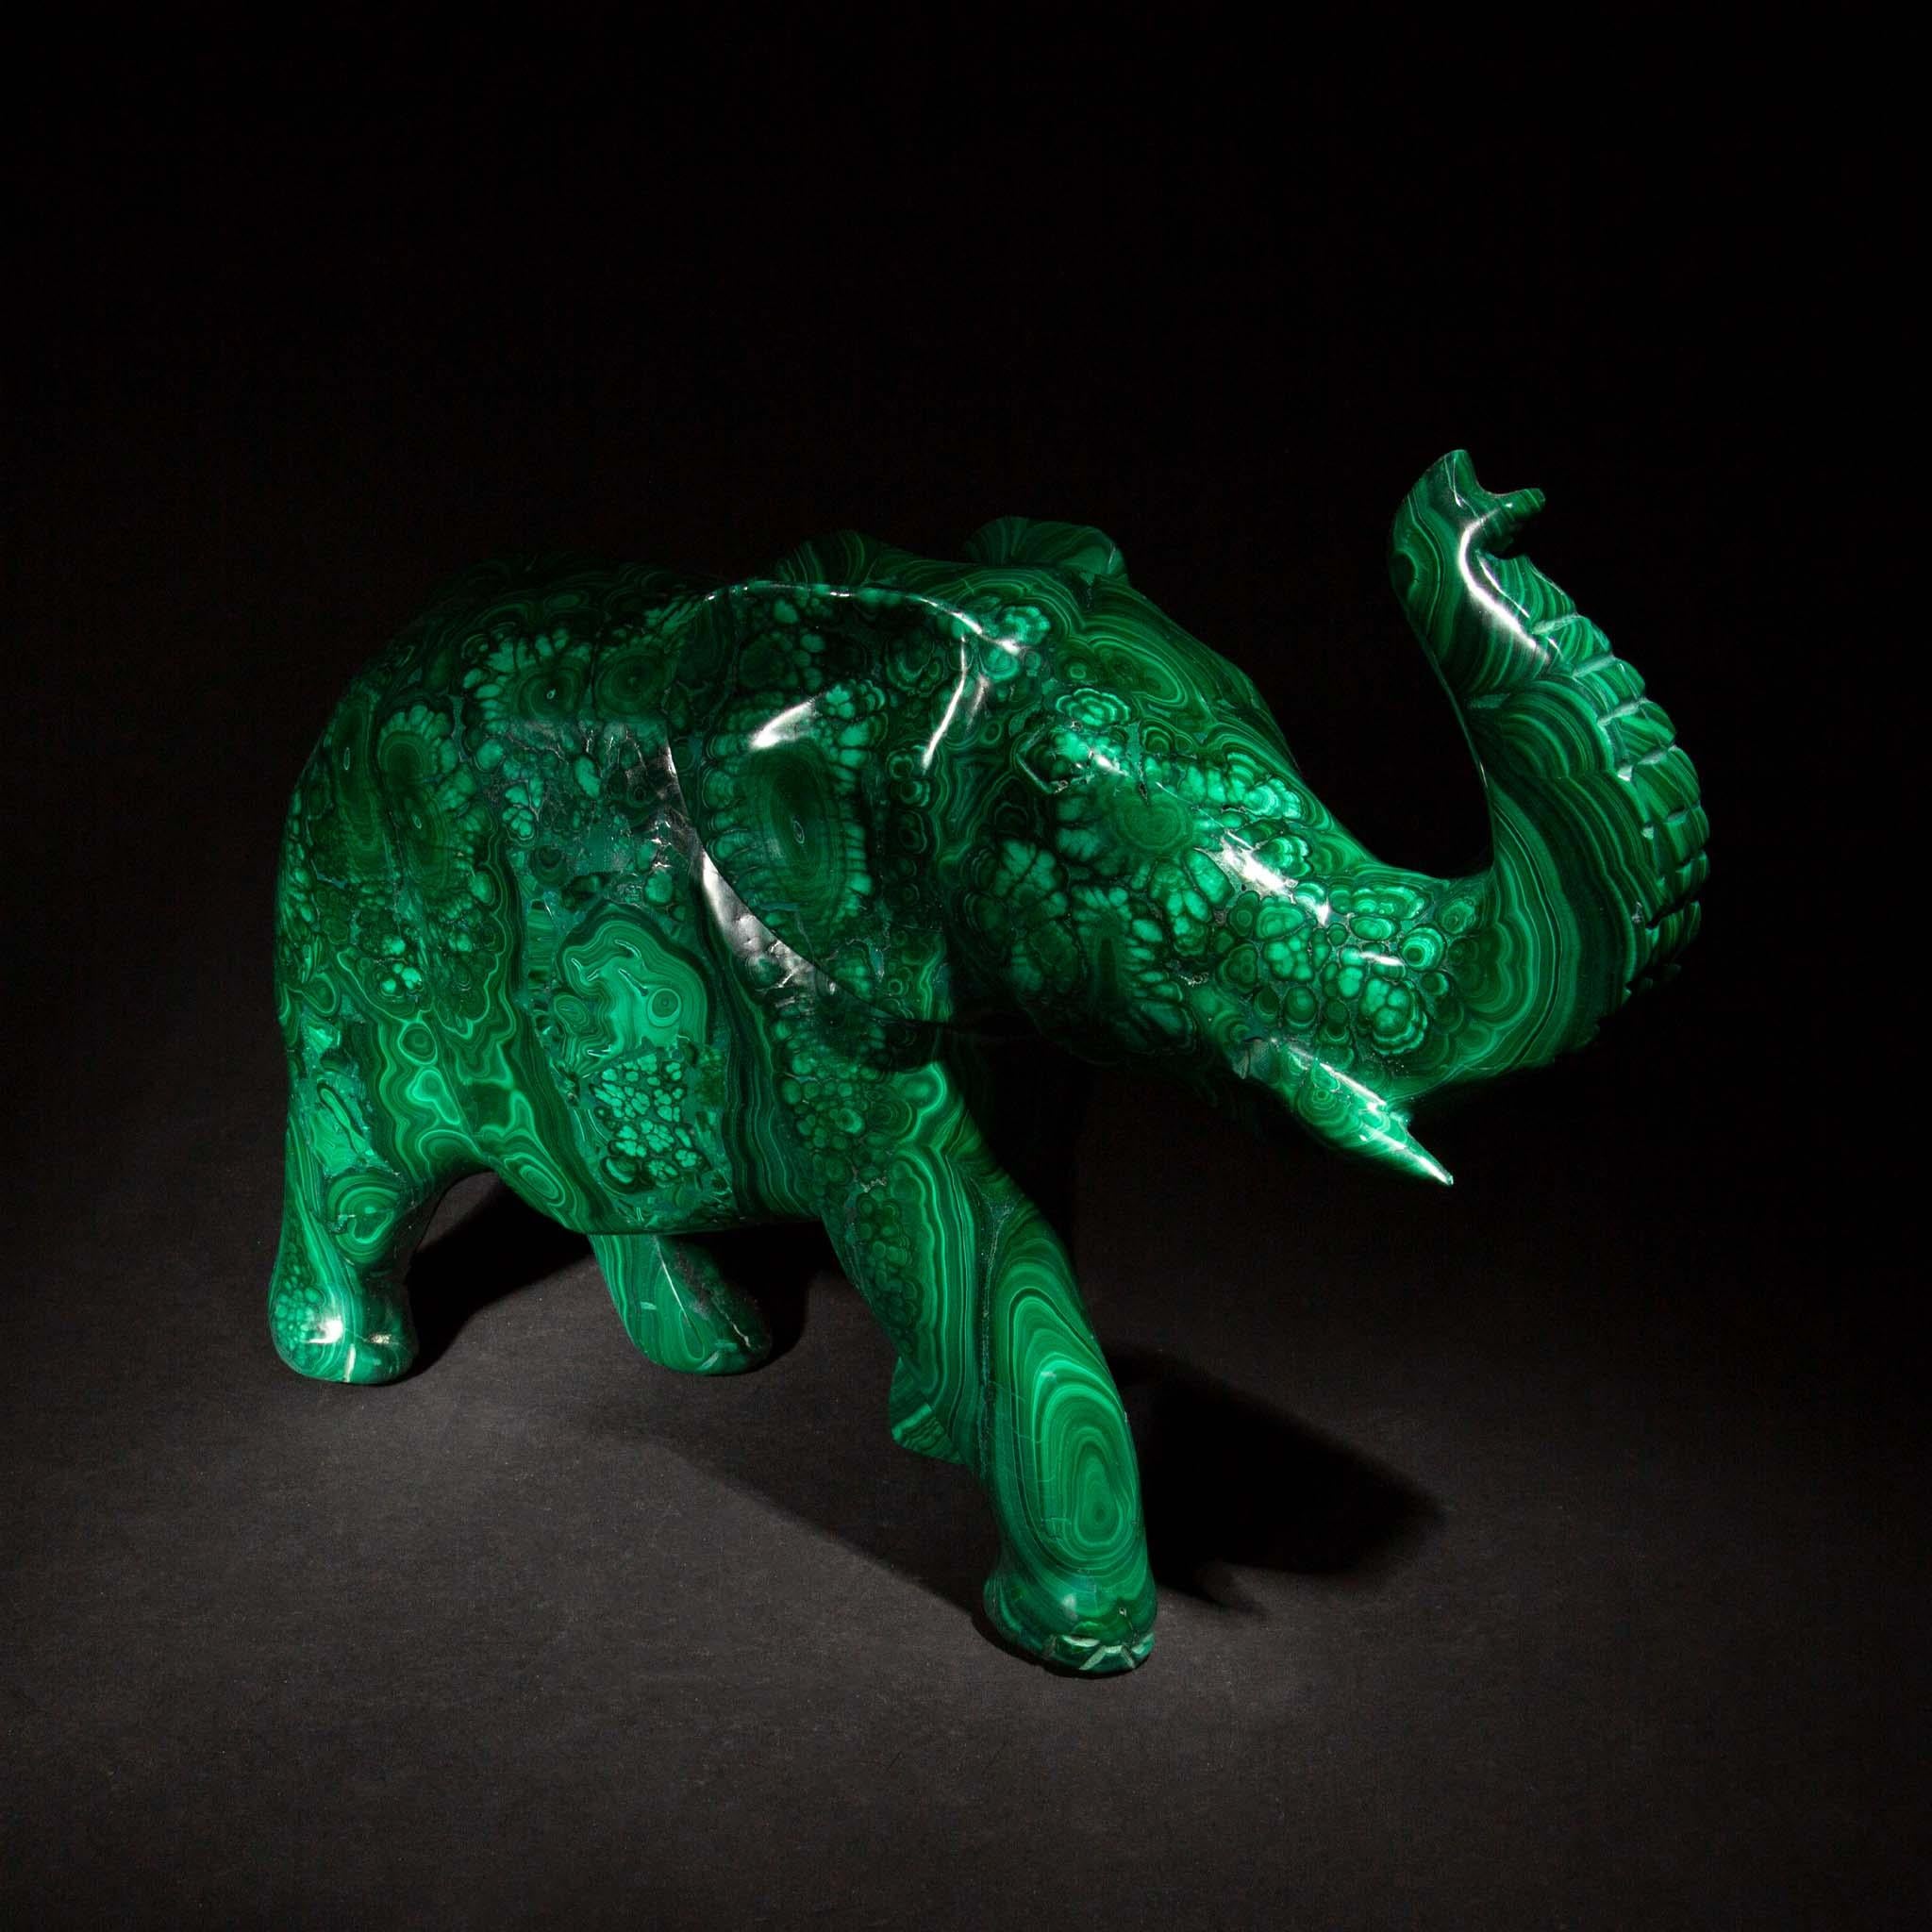 This large carved malachite elephant is a stunning display of craftsmanship and the natural beauty of gemstones. Measuring 12 inches in length, 4 inches in width, and standing 9.25 inches tall, it is meticulously sculpted from richly veined